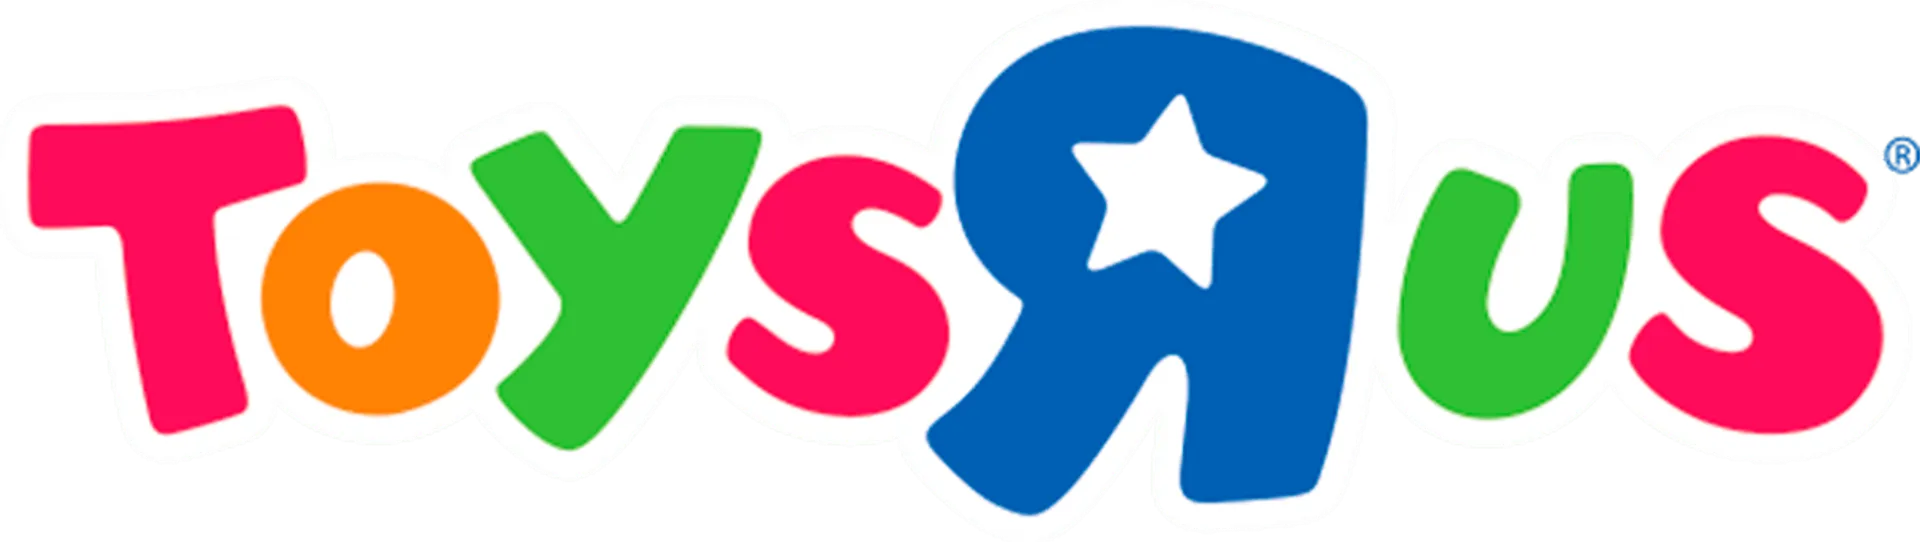 TOYS ”R” US logo. Current weekly ad